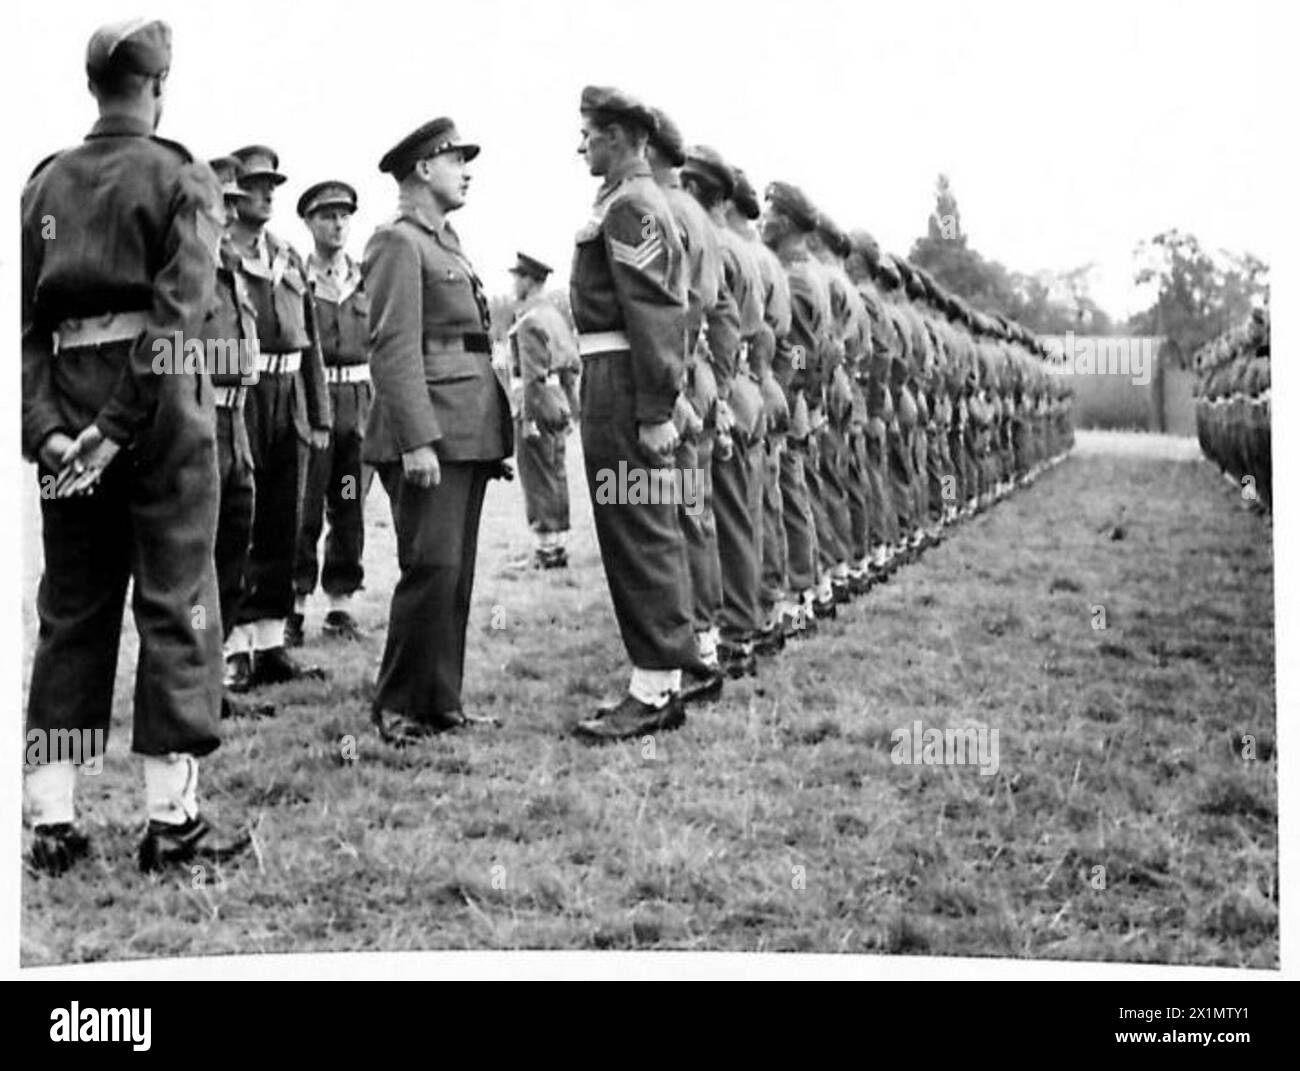 MAJOR GENERAL PRATT ADDRESSING NEWFOUNDLAND TROOPS BEFORE THEIR DEPARTURE FOR HOME - Major General Pratt inspecting the men on parade, British Army Stock Photo